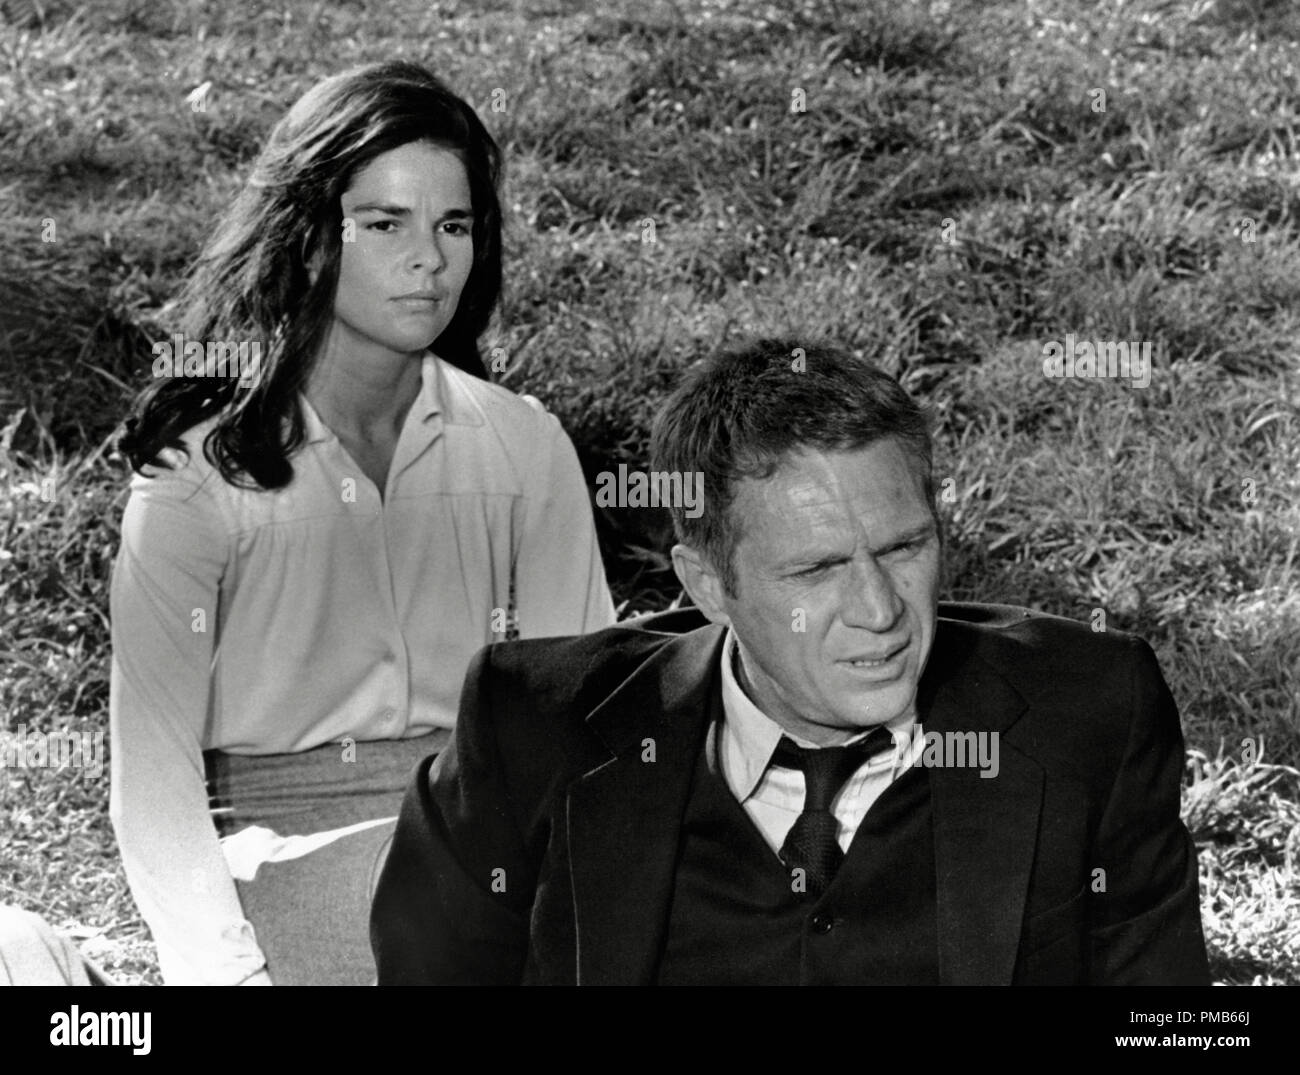 Ali Macgraw, Steve McQueen, 'The Getaway' (1972) Warner Bros.  File Reference # 33536 830THA  For Editorial Use Only -  All Rights Reserved Stock Photo